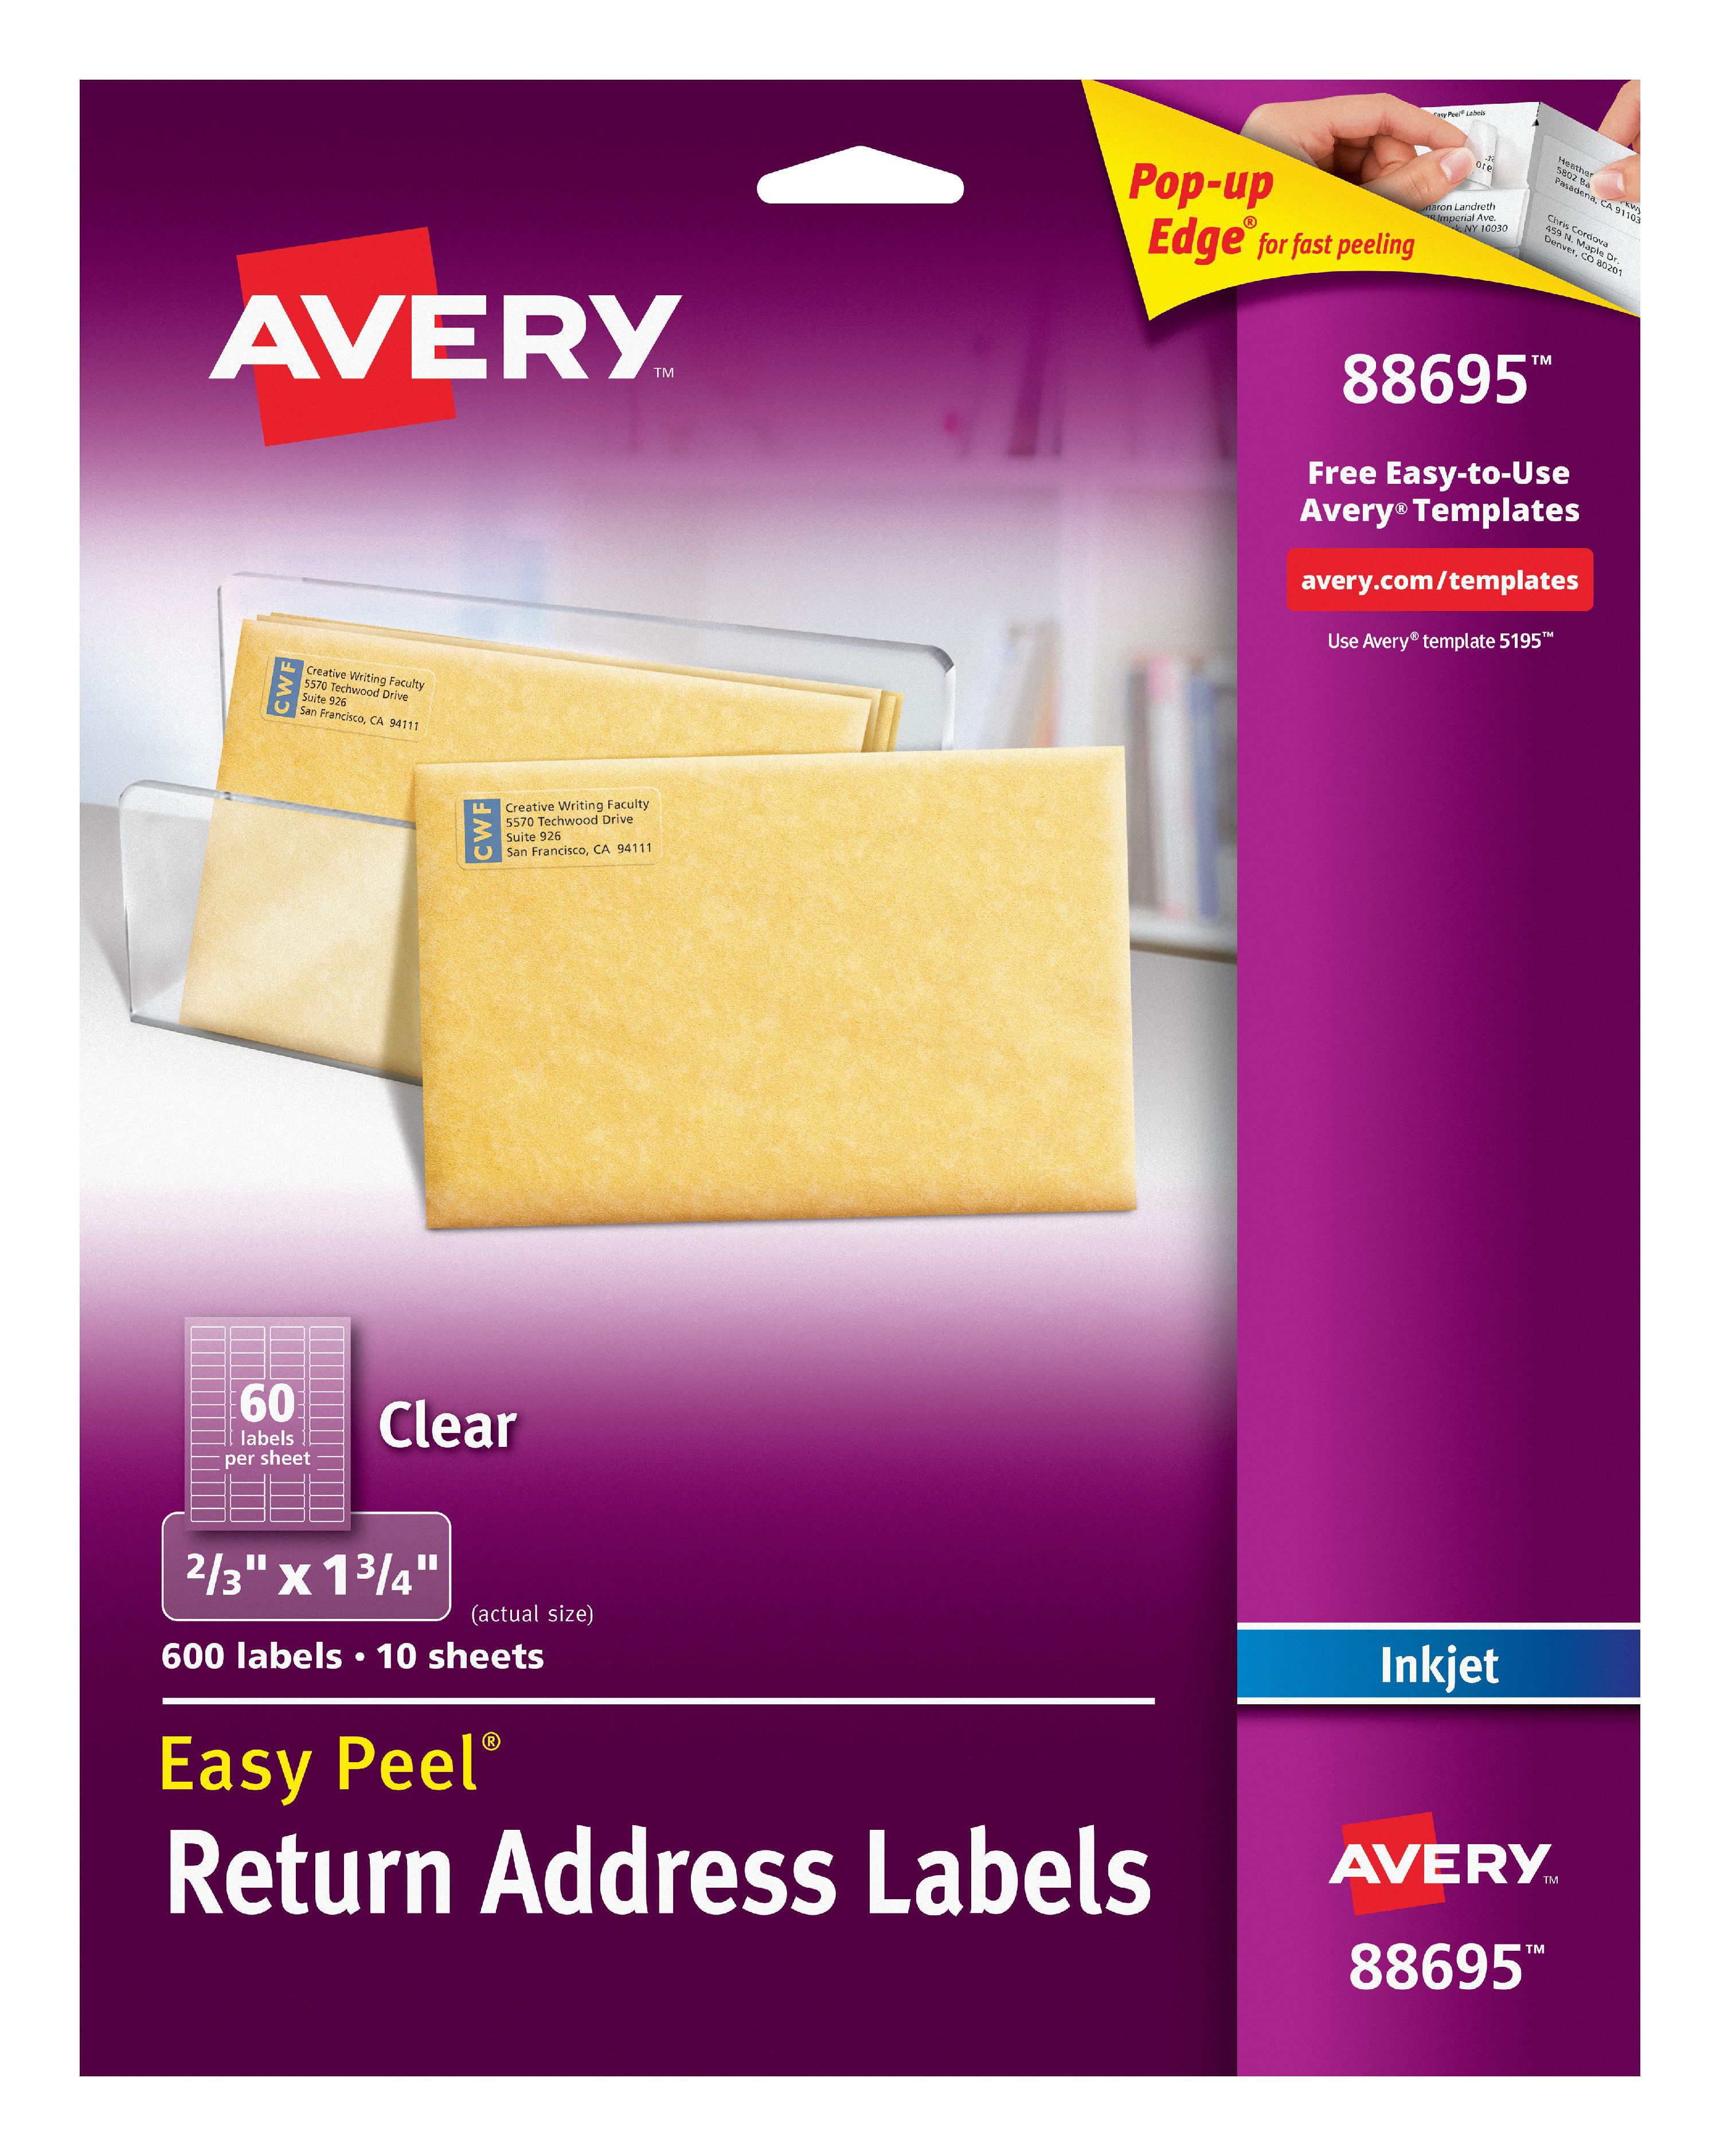 Avery 88695 Template